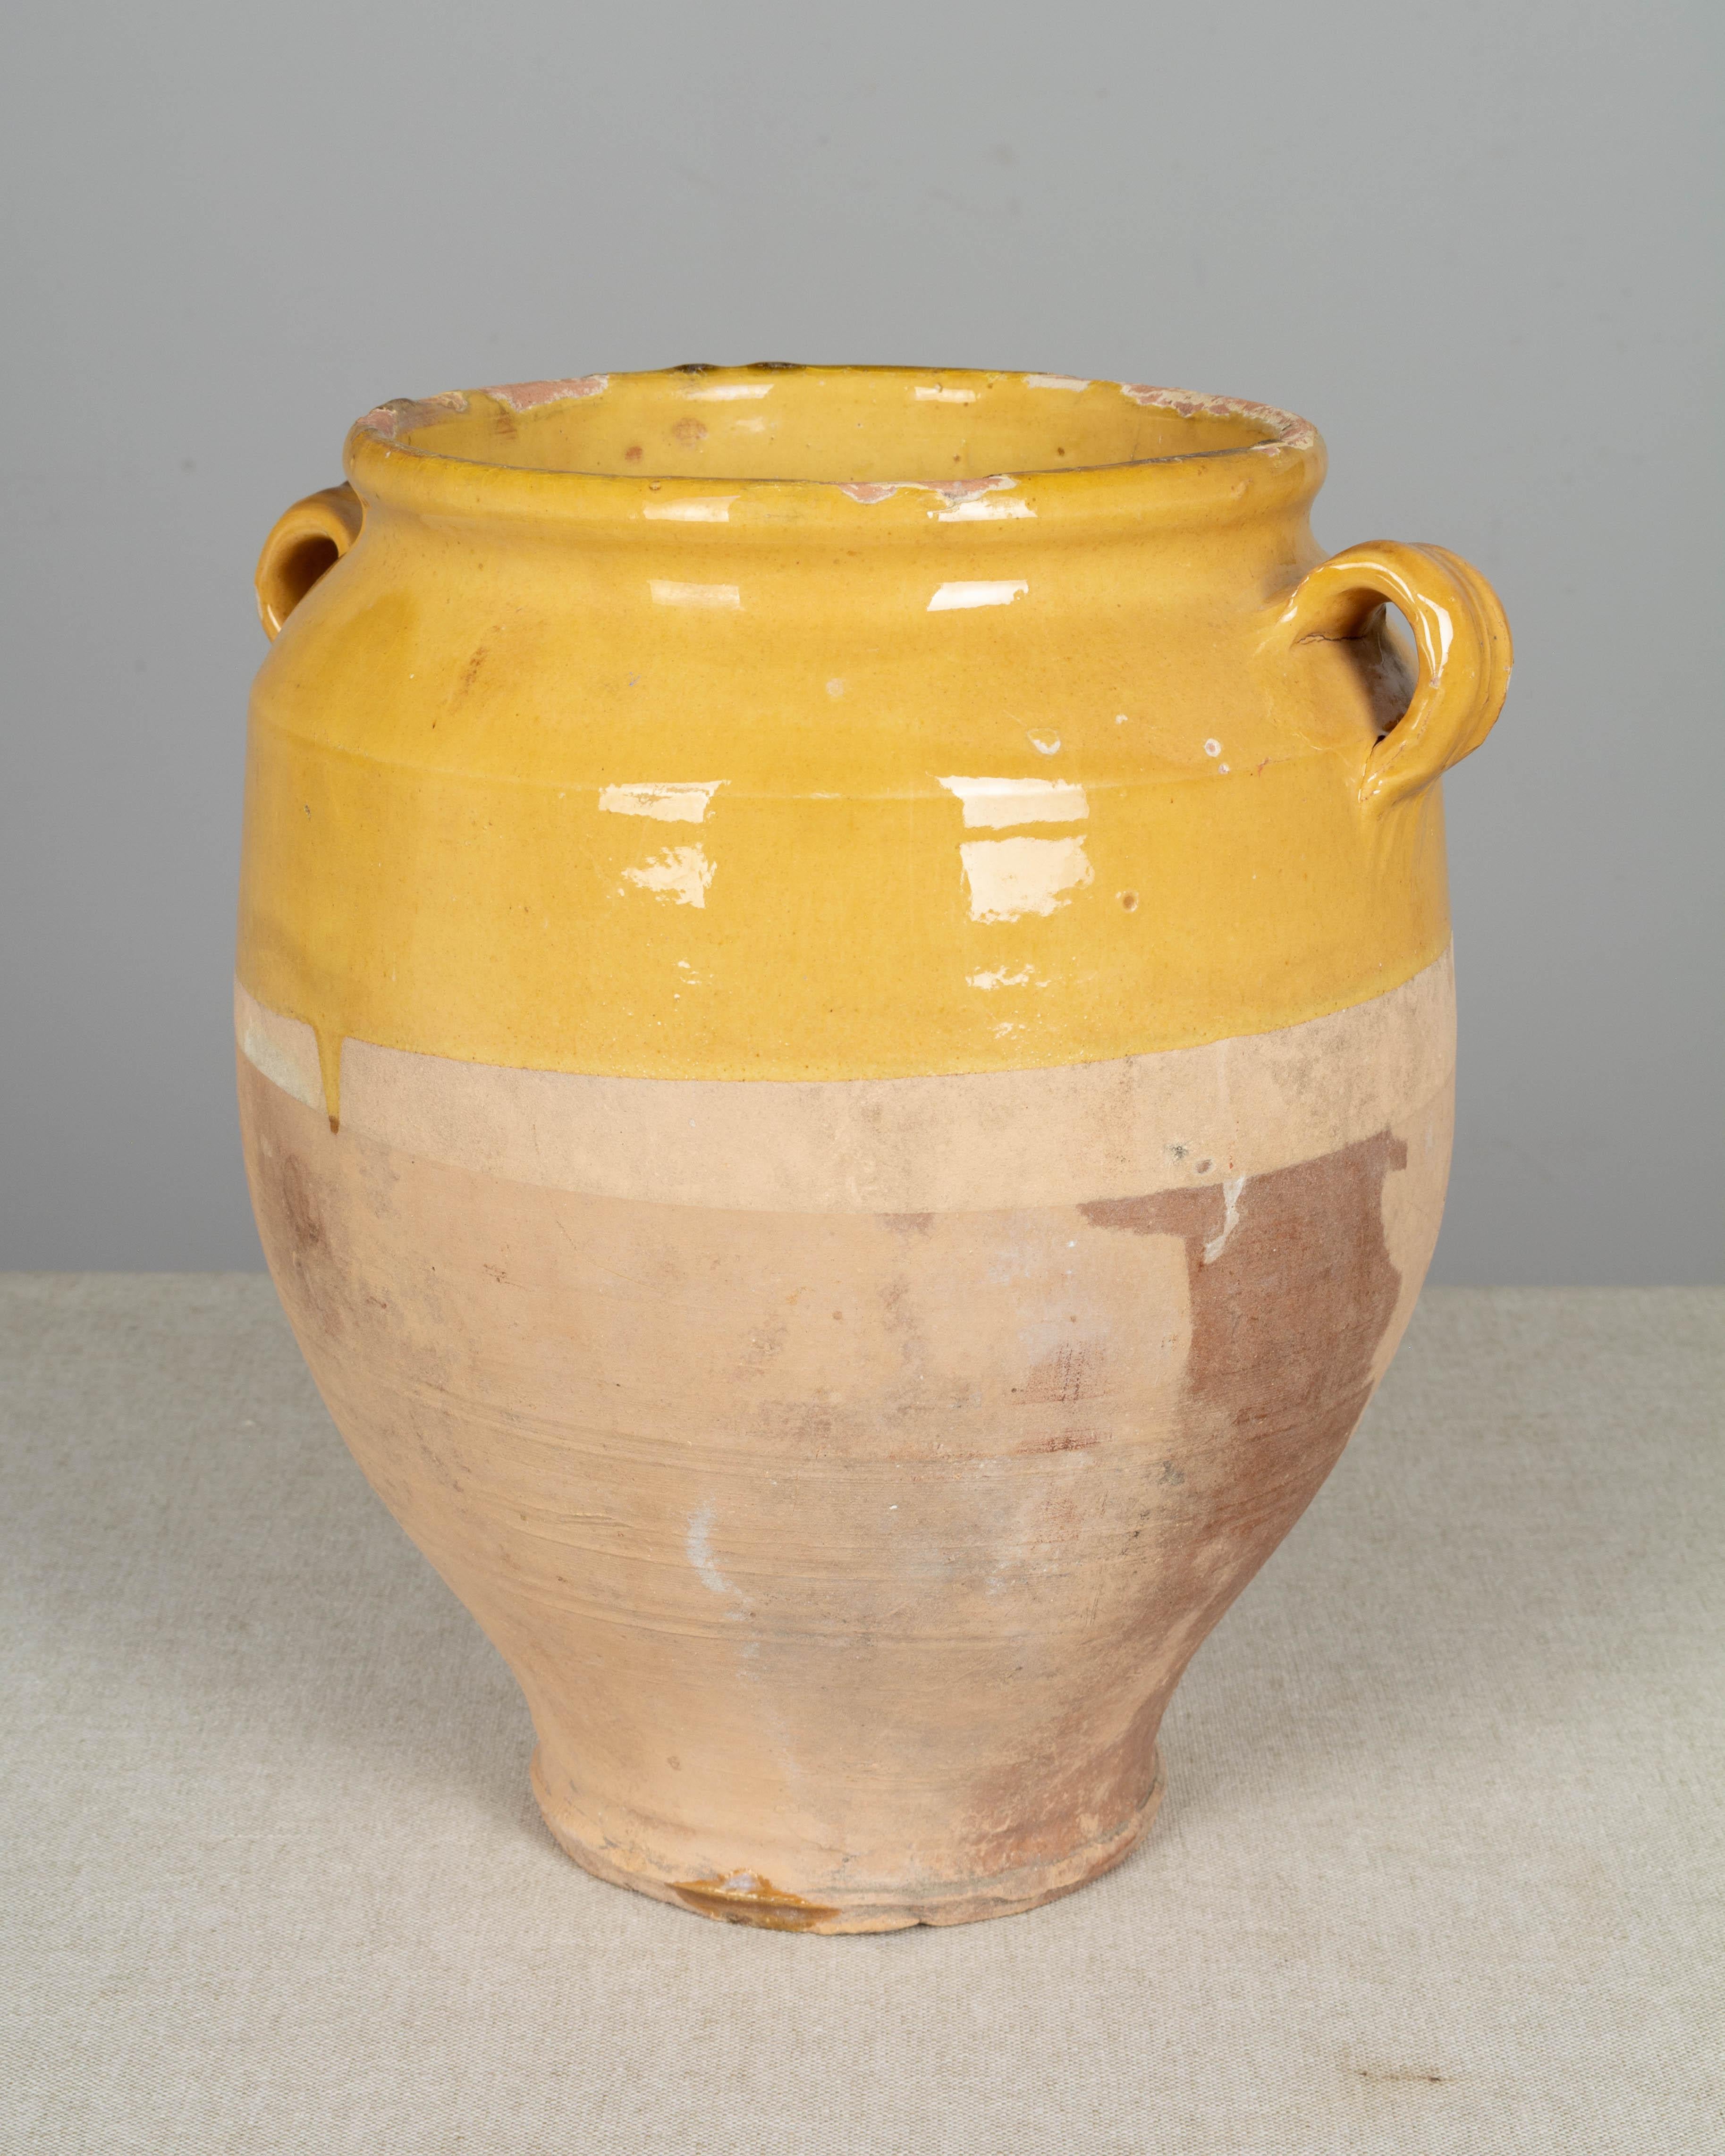 An earthenware confit pot from the Southwest of France with traditional yellow glaze. Some chips and losses to glaze. These ordinary earthenware vessels were once used daily in the French country home and have beautiful rustic glazes of green, ochre